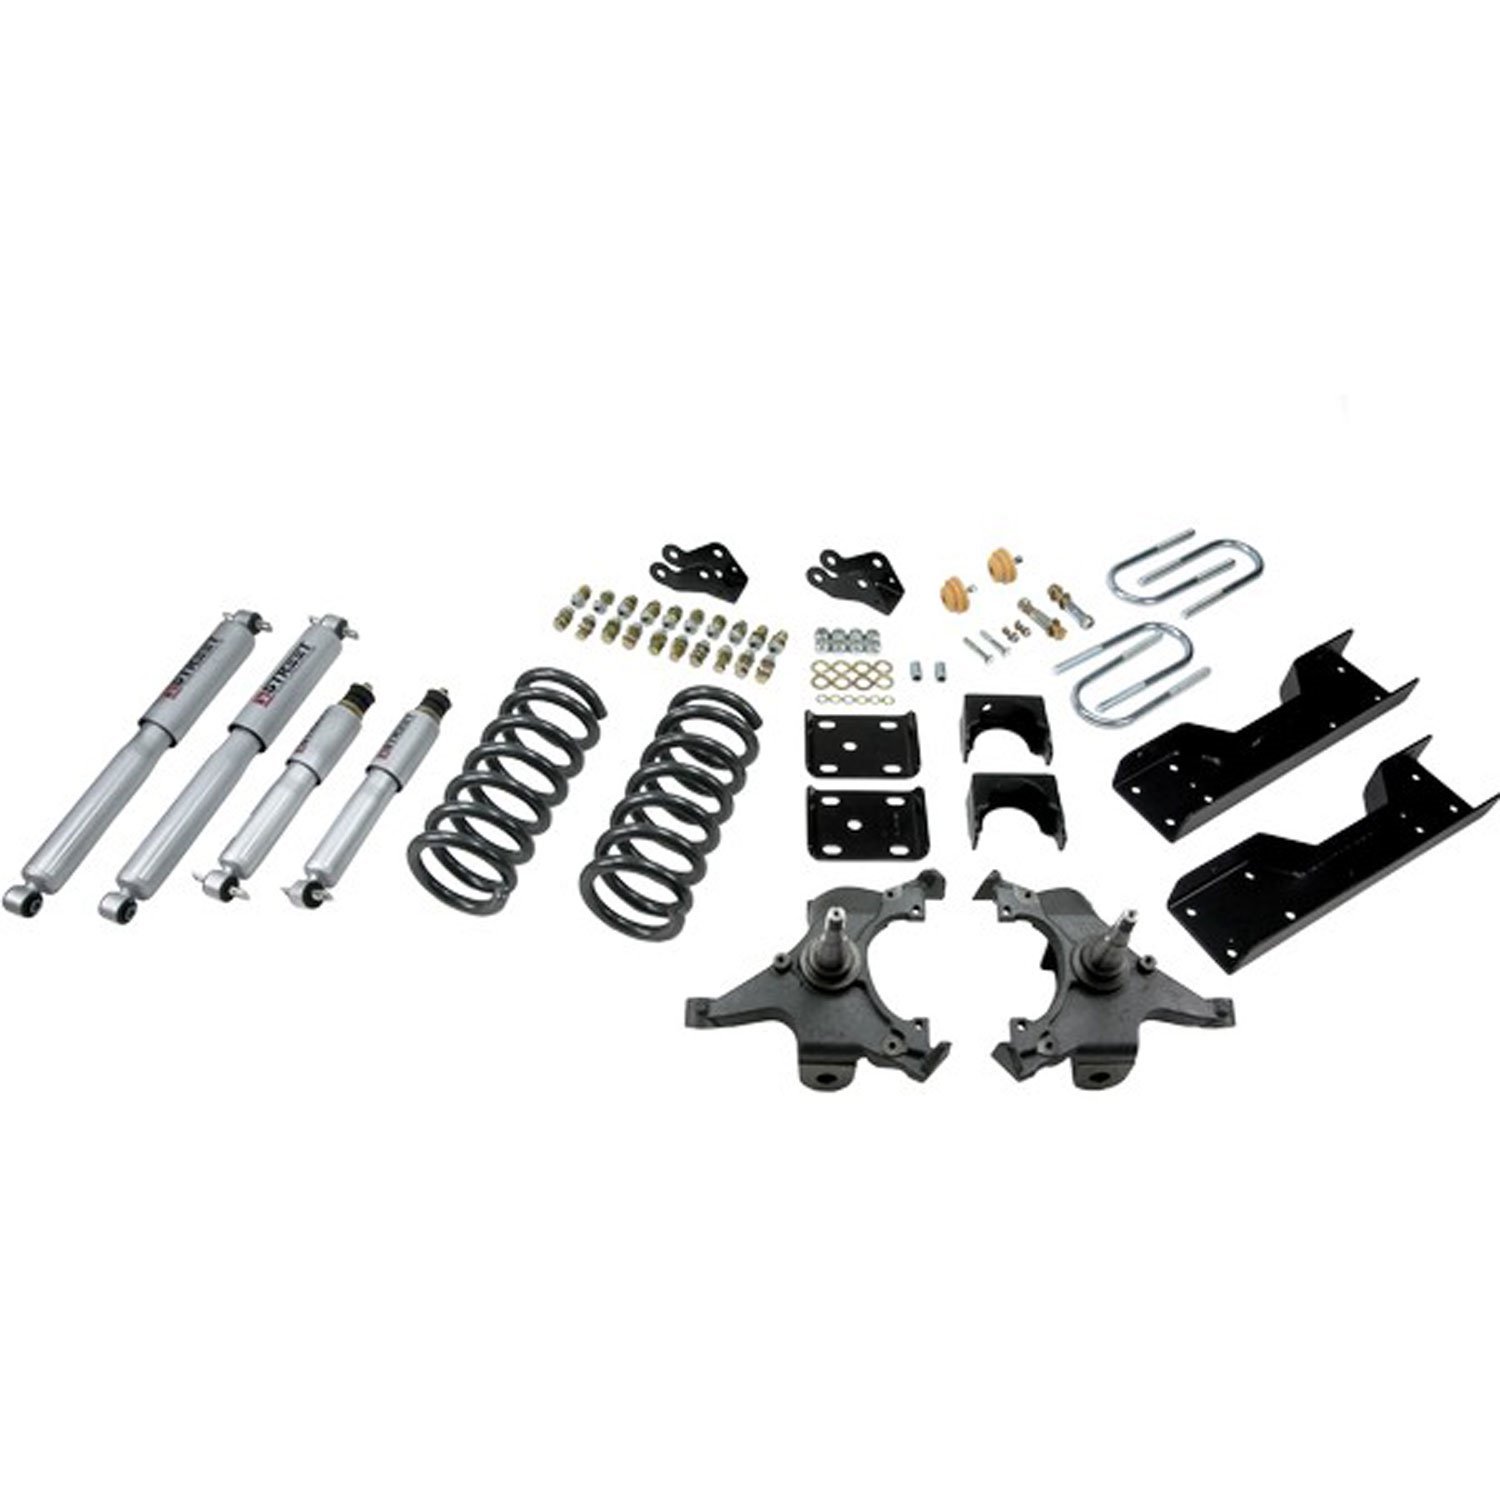 Complete Lowering Kit for 1988-1998 GM C2500/1990-1994 Chevy C1500 SS 454